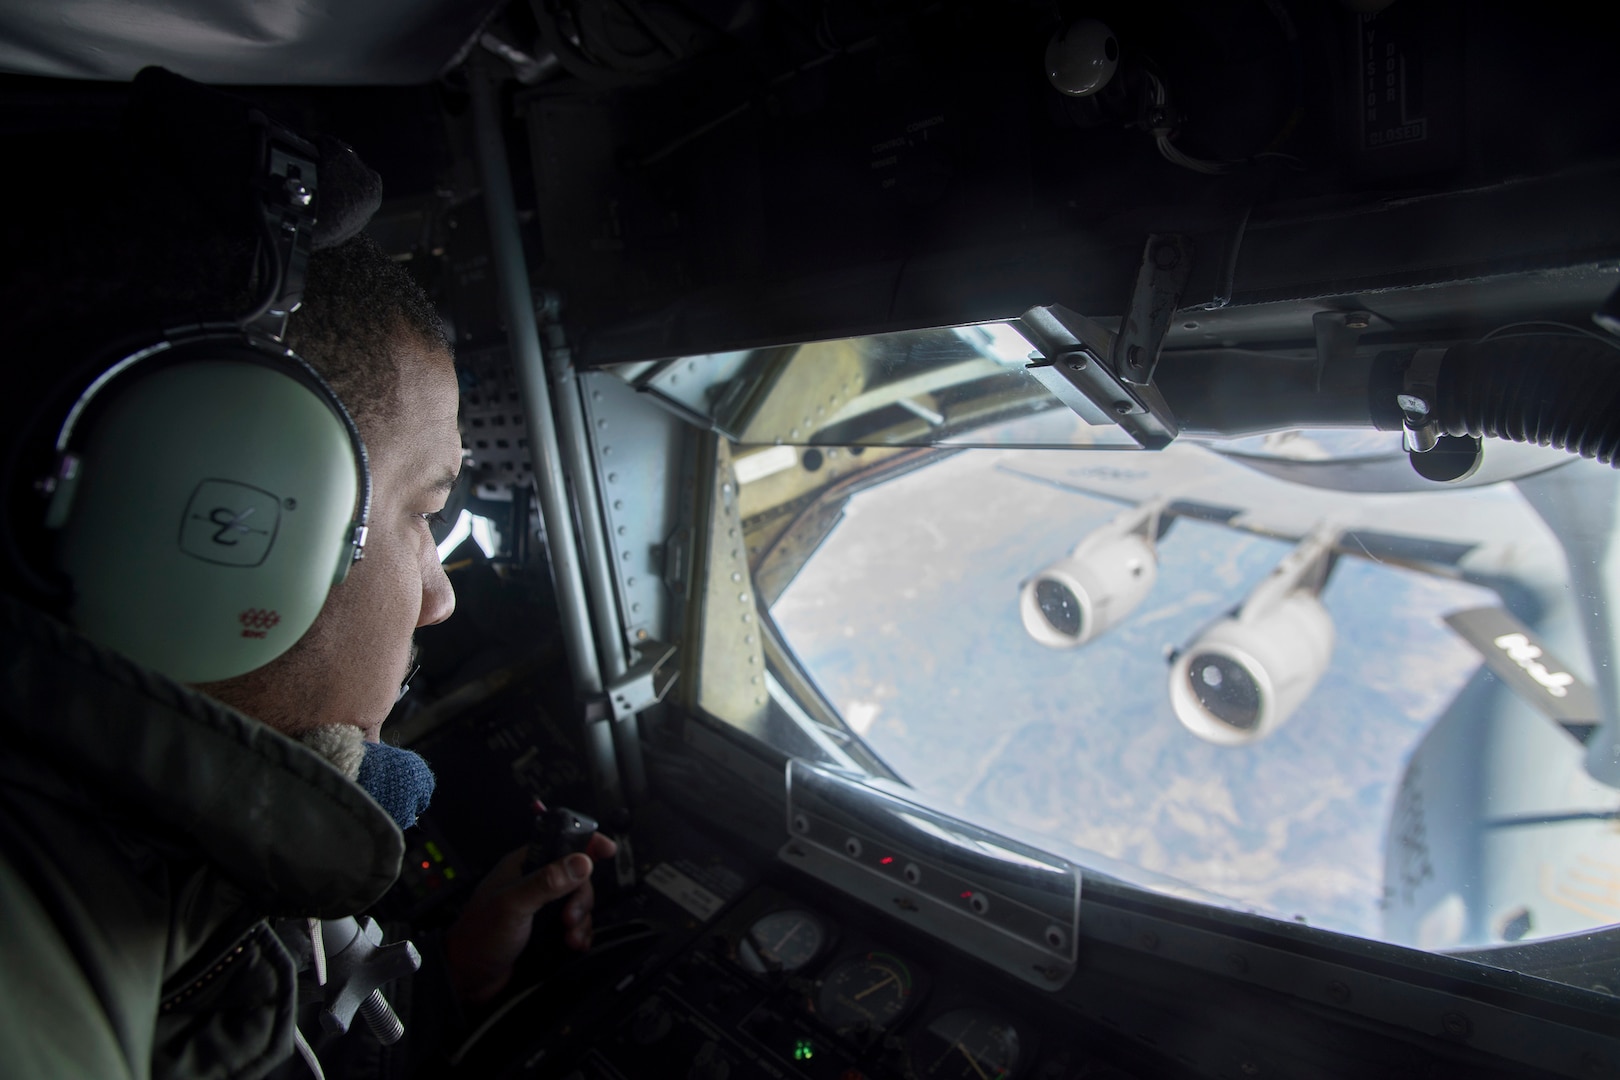 New Jersey Air National Guard Staff Sgt. Vince Stokes, a boom operator with the 141st Air Refueling Squadron, refuels a C-17 Globemaster III from Joint Base Charleston, S.C., over the continental U.S., Jan. 28, 2019. The KC-135R Stratotanker from Joint Base McGuire-Dix-Lakehurst, N.J., is flown by the 141st ARS from the 108th Wing.